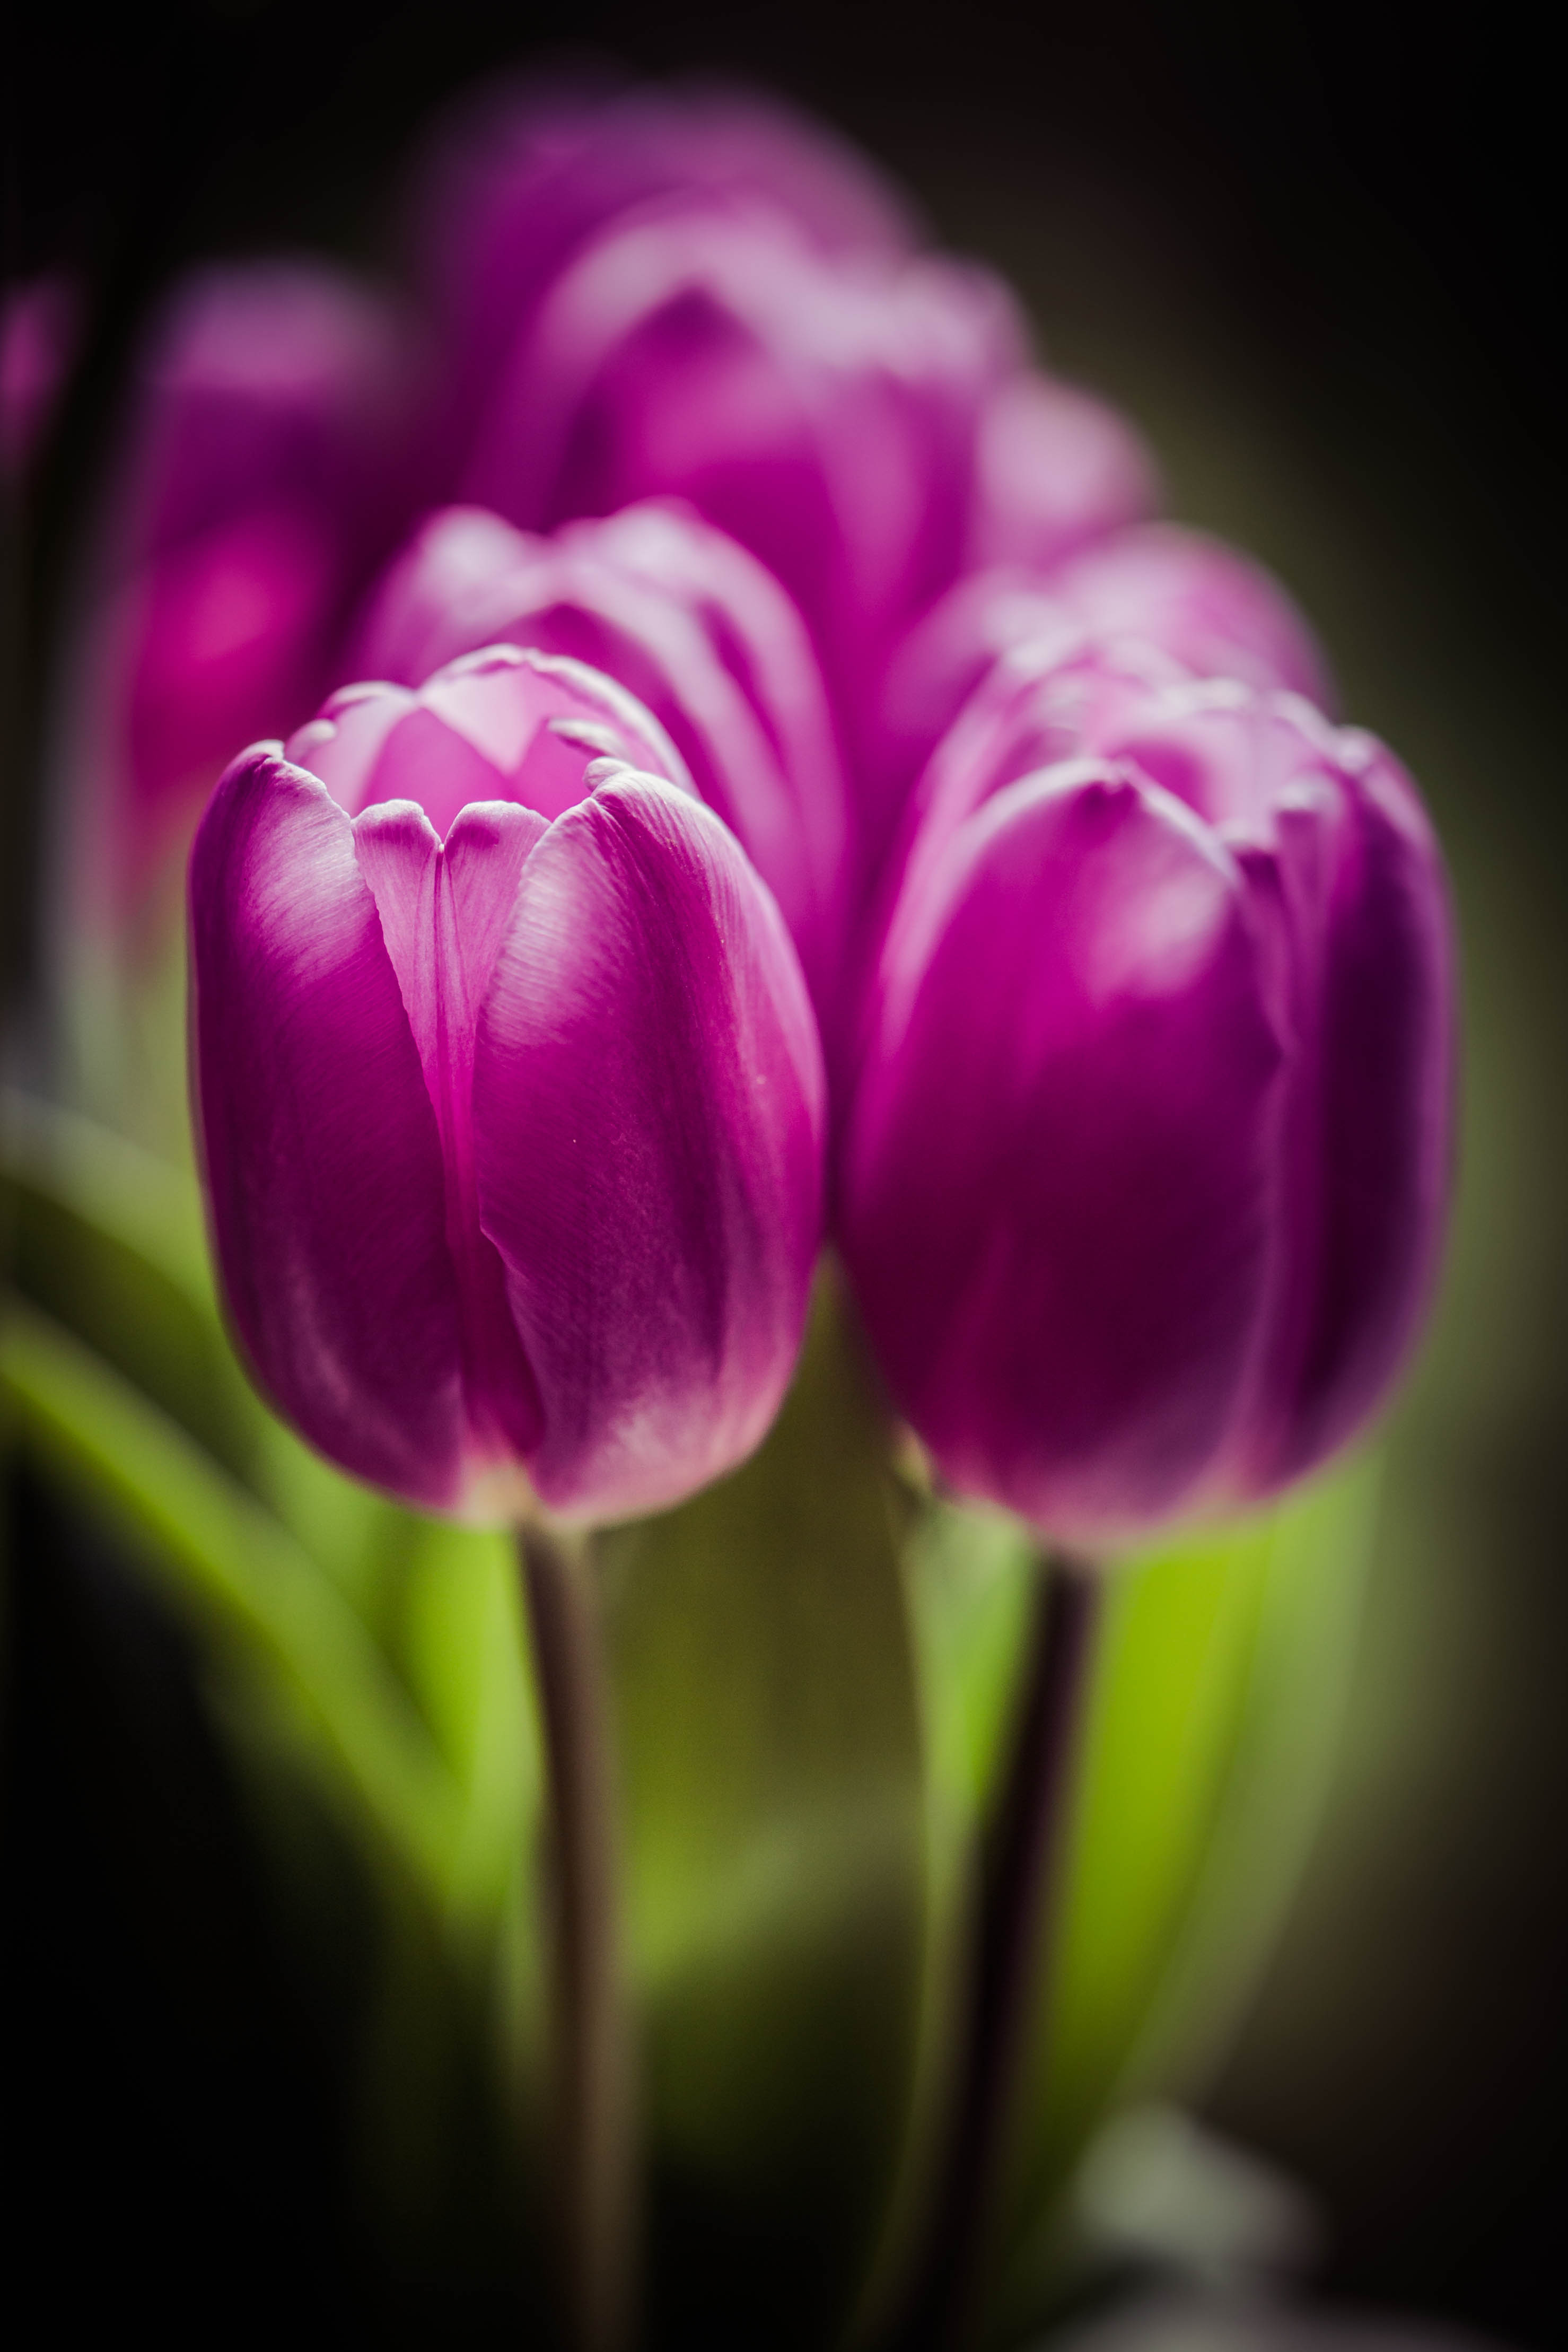 _MG_4560Purple tulips.jpg undefined by WPC-187